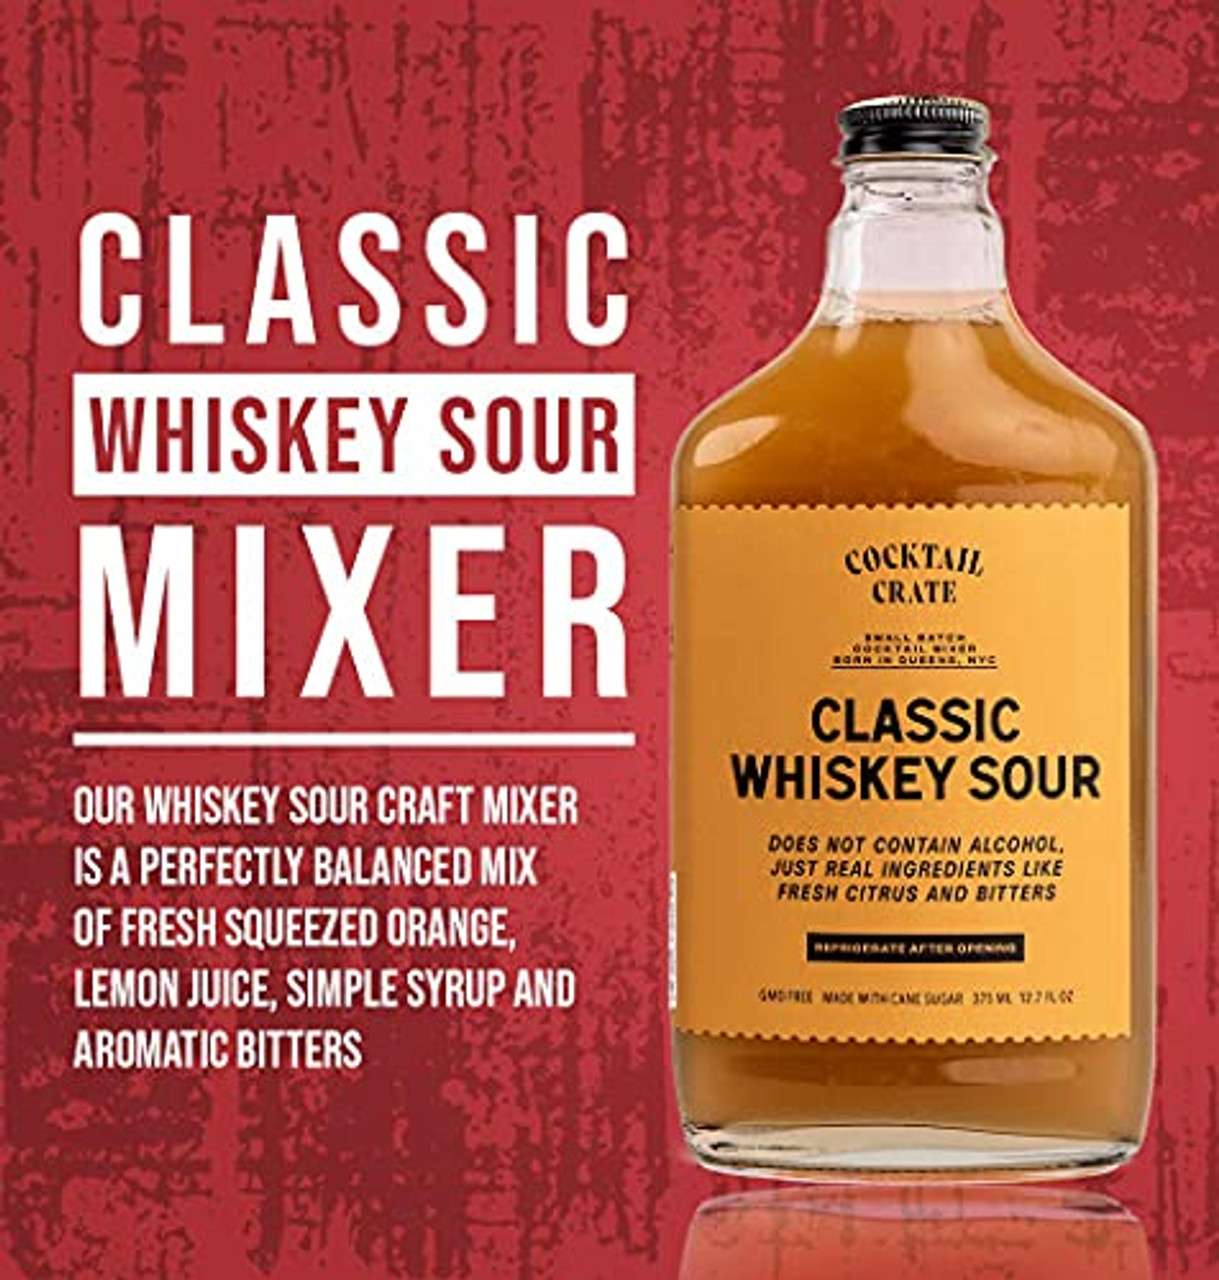 Cocktail Crate Whiskey Lover's 3 Pack Drink Mixers | Award-Winning Craft  Cocktail Mixers - Premium Cocktail Syrup Handcrafted with Aromatic Bitters  